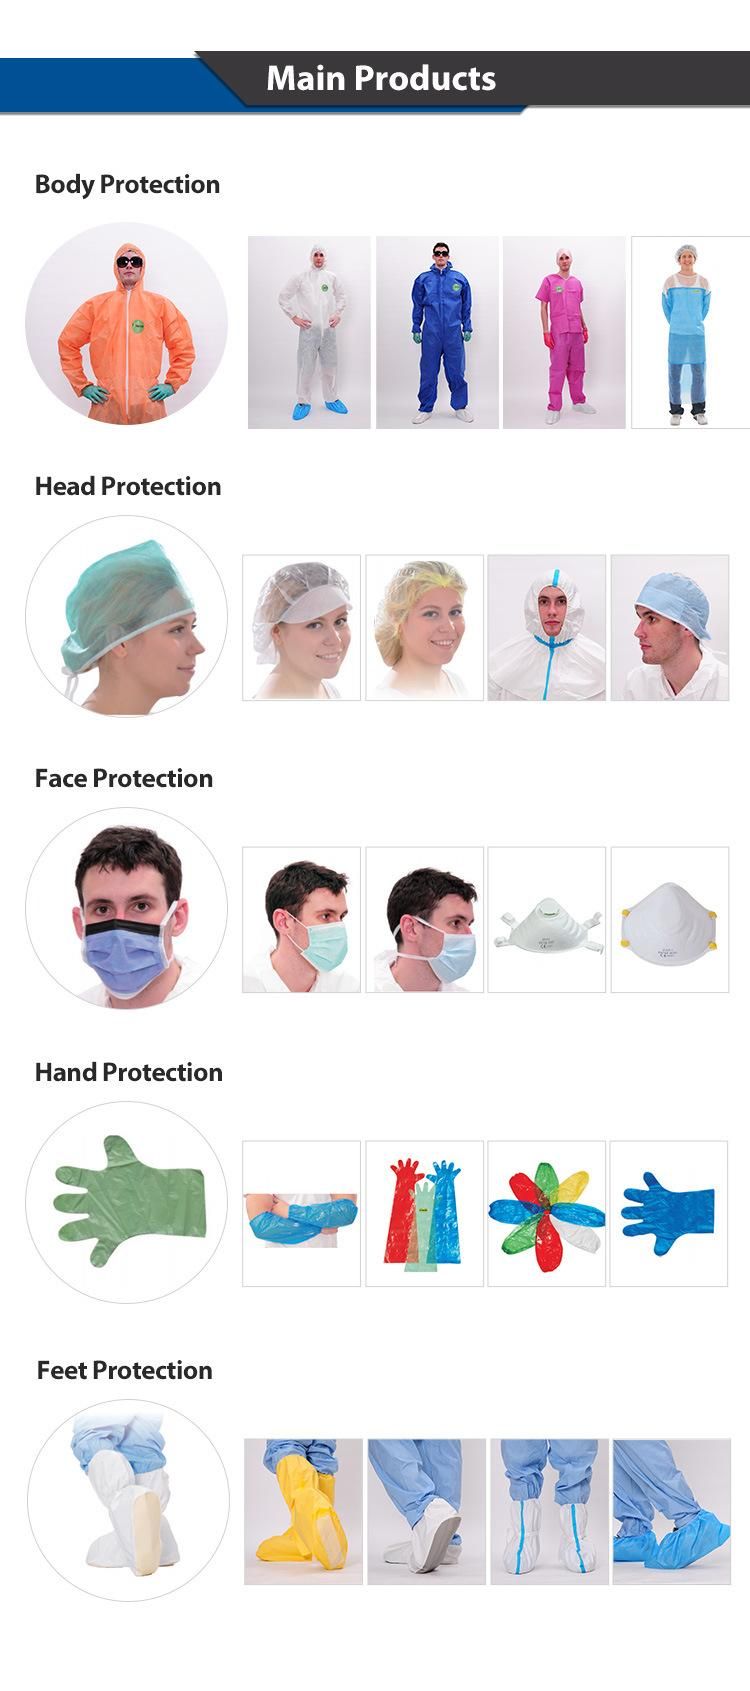 Hospital Protective Surgeon Head Cover Medical Hat Disposable Surgical Cap